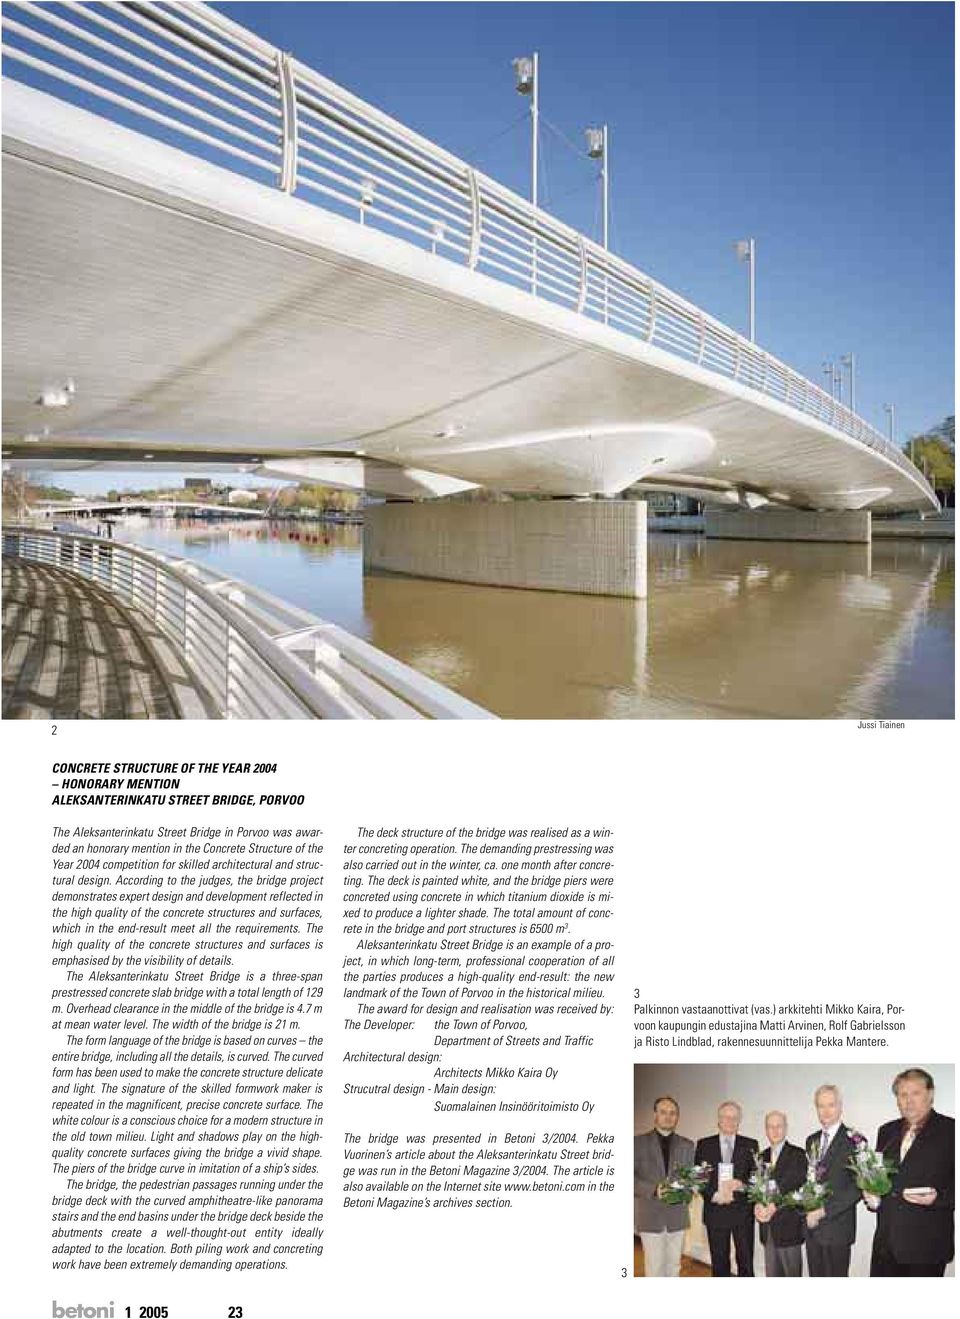 According to the judges, the bridge project demonstrates expert design and development reflected in the high quality of the concrete structures and surfaces, which in the end-result meet all the